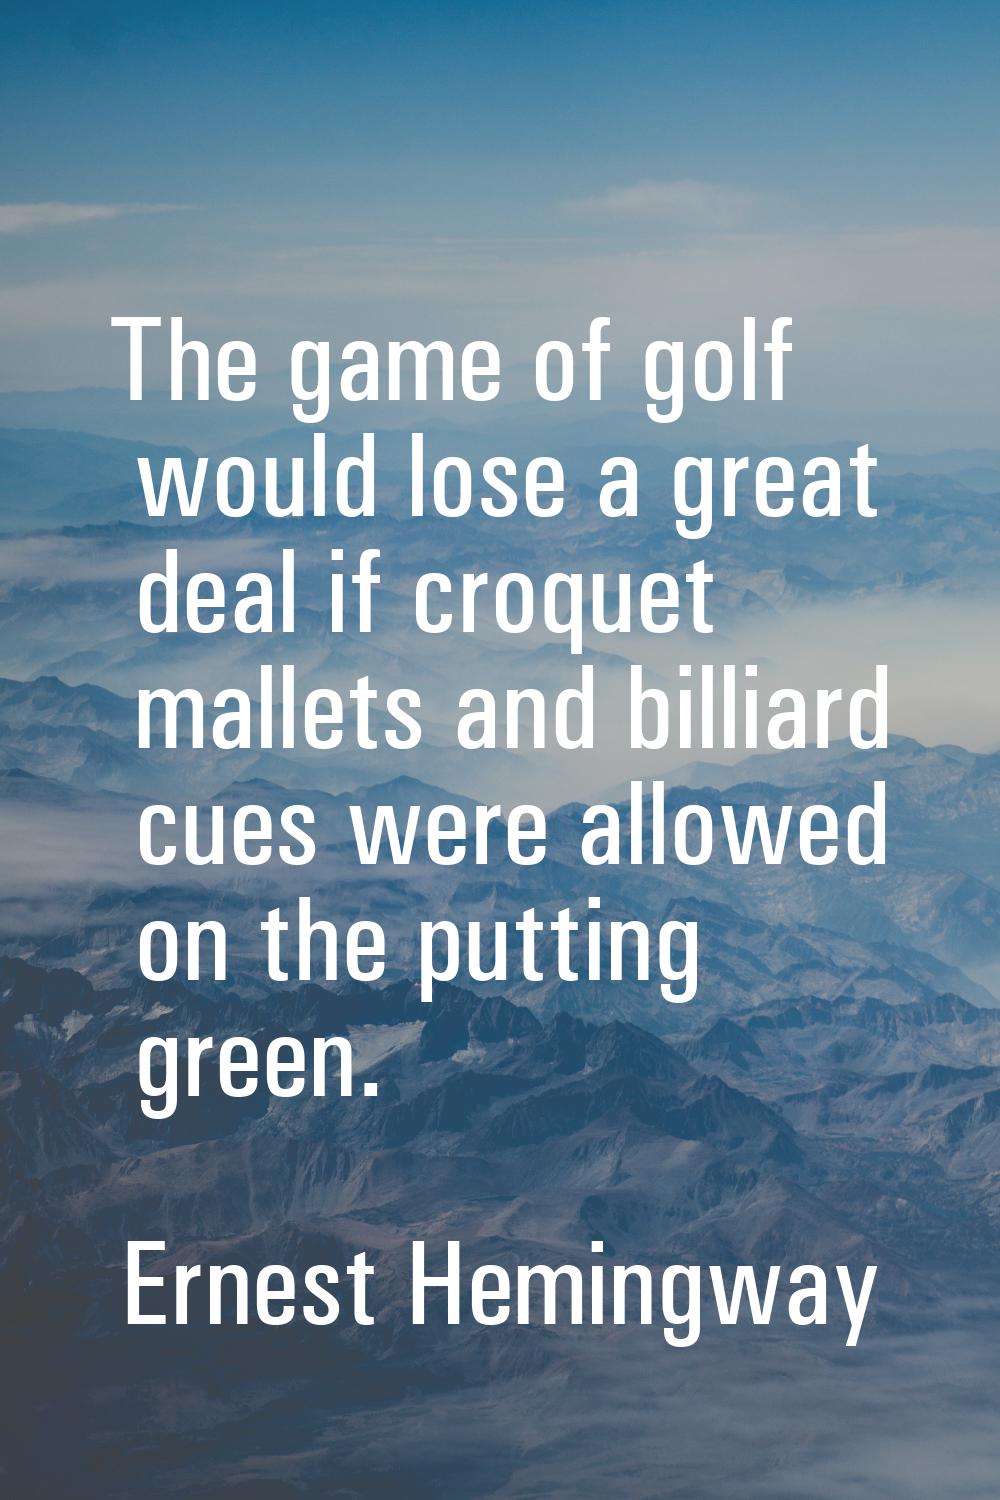 The game of golf would lose a great deal if croquet mallets and billiard cues were allowed on the p